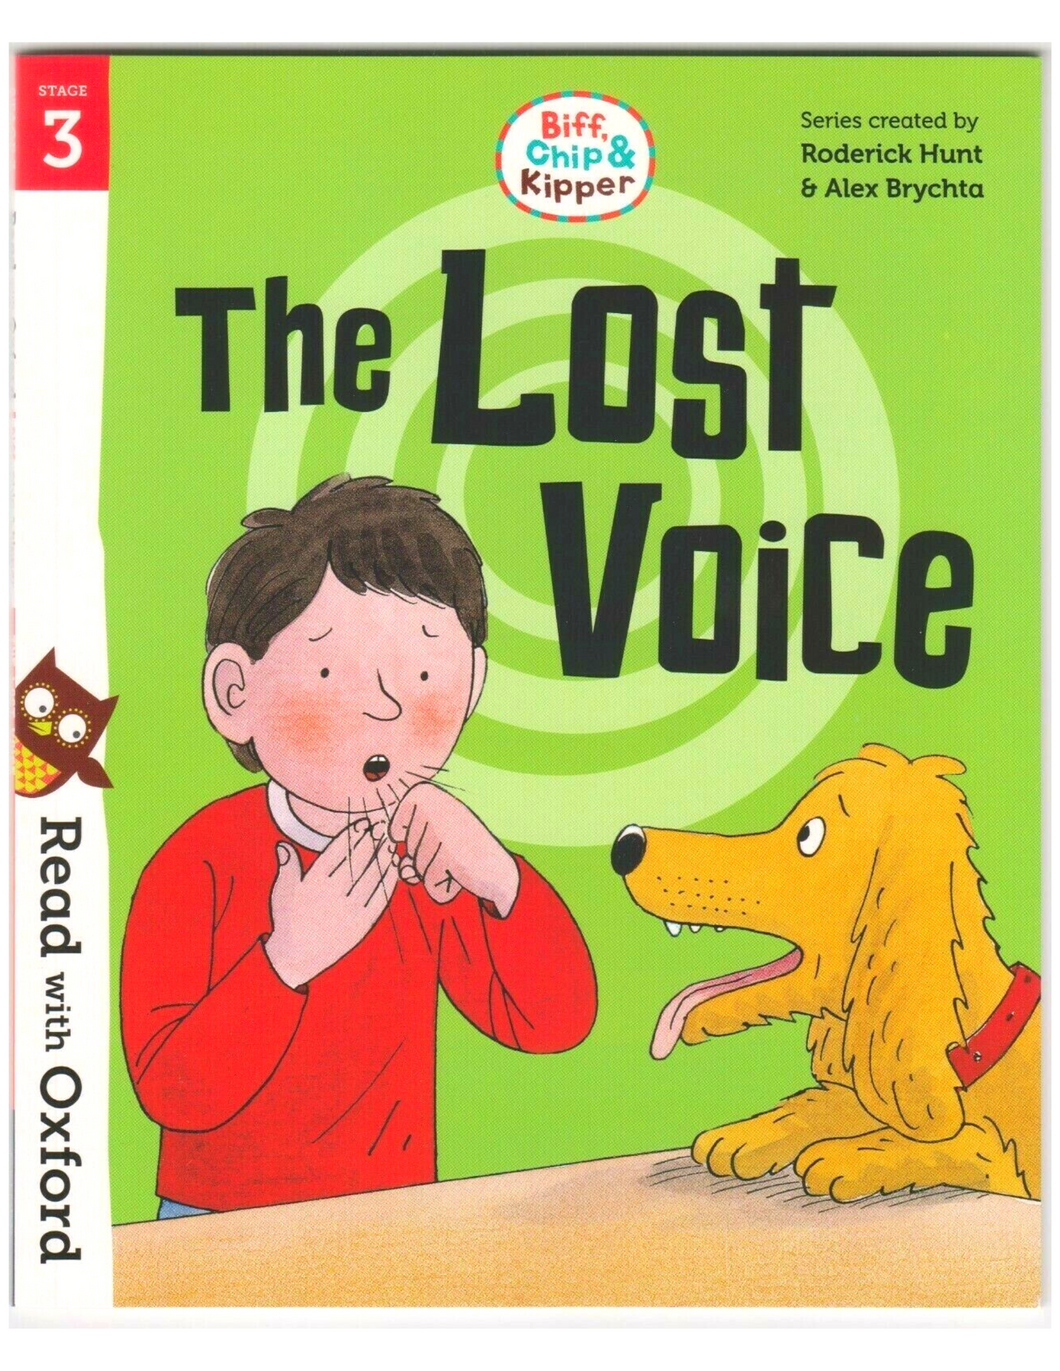 Biff, Chip & Kipper: The Lost Voice (Stage 3)